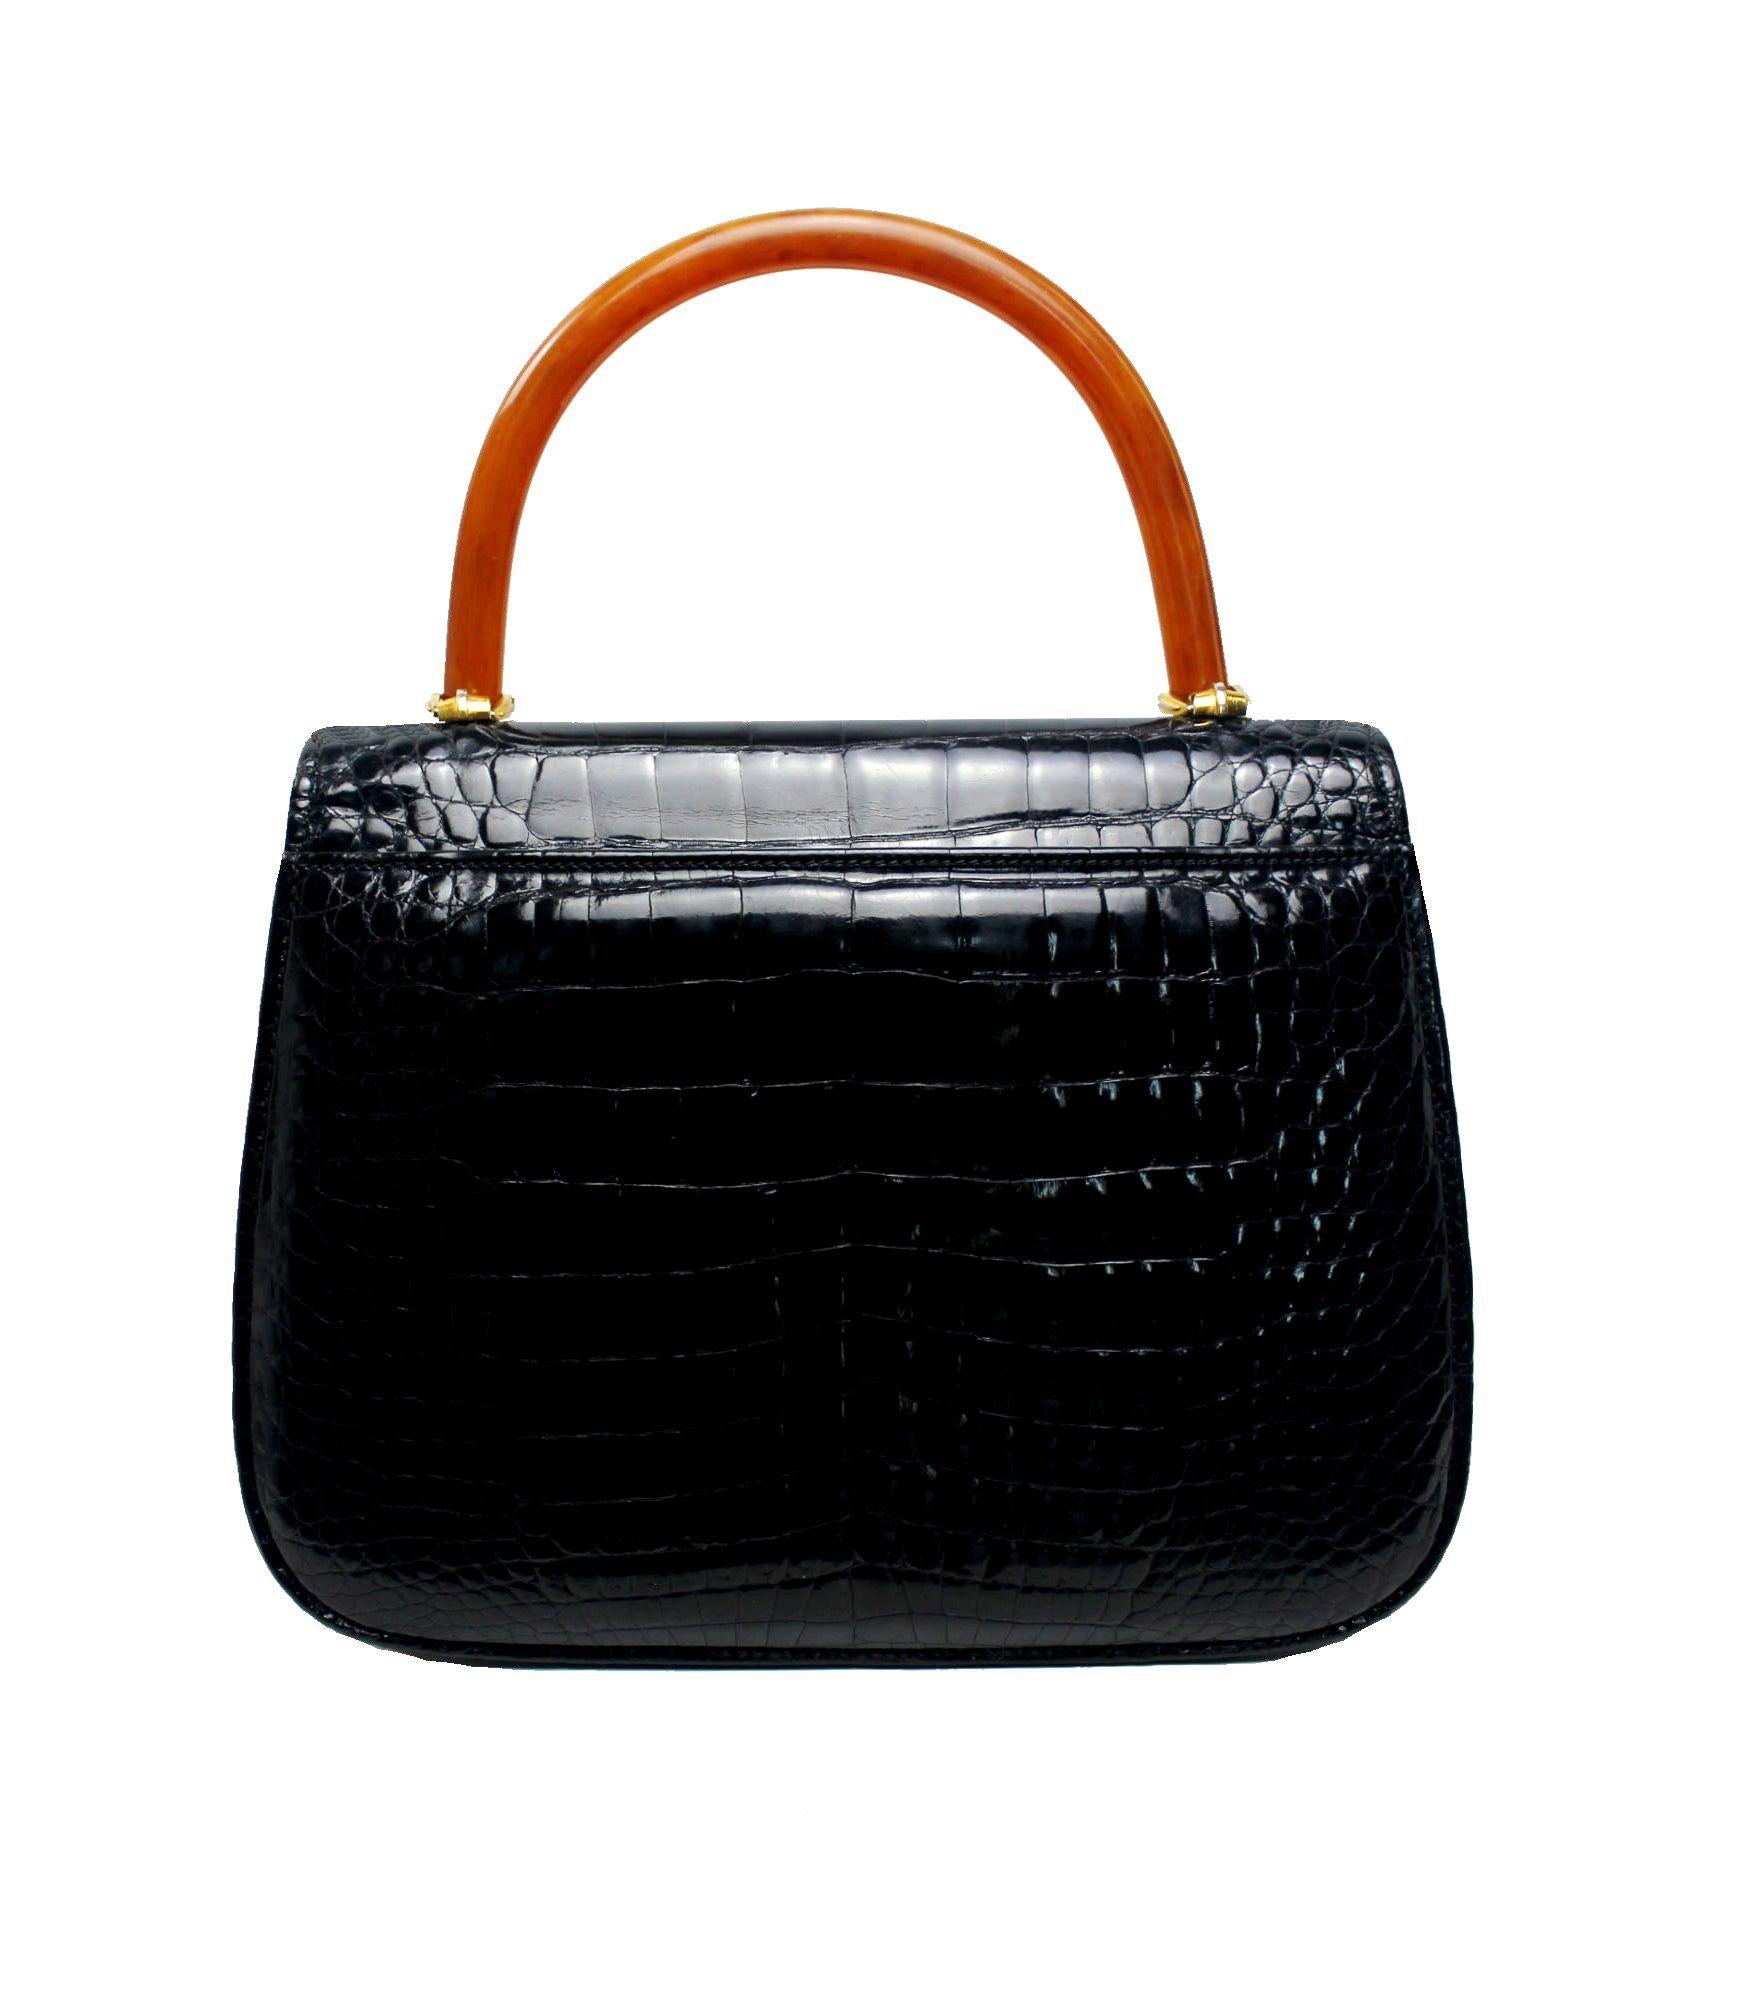 A rare vintage GUCCI exotic skin handbag
Lucite top handle
Shiny black alligator skin
A very special piece in excellent overall condition
One inner pocket with zip and GUCCI crest
Shiny light golden hardware
Stamp 